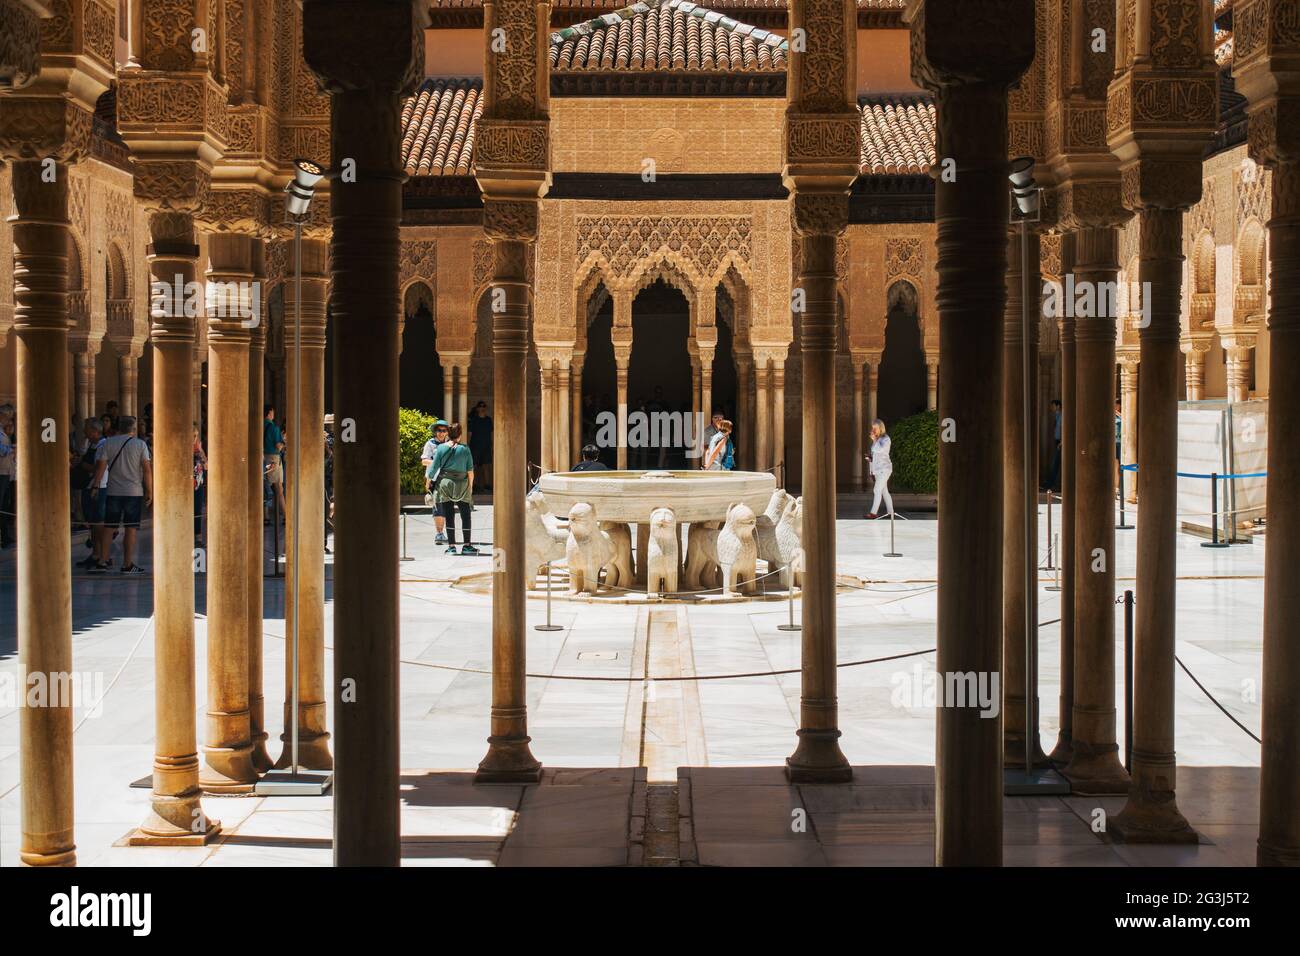 Pillars line the entrance to the Patio de los Leones (Patio of the Lions) inside the Alhambra palace, Granada, Spain Stock Photo